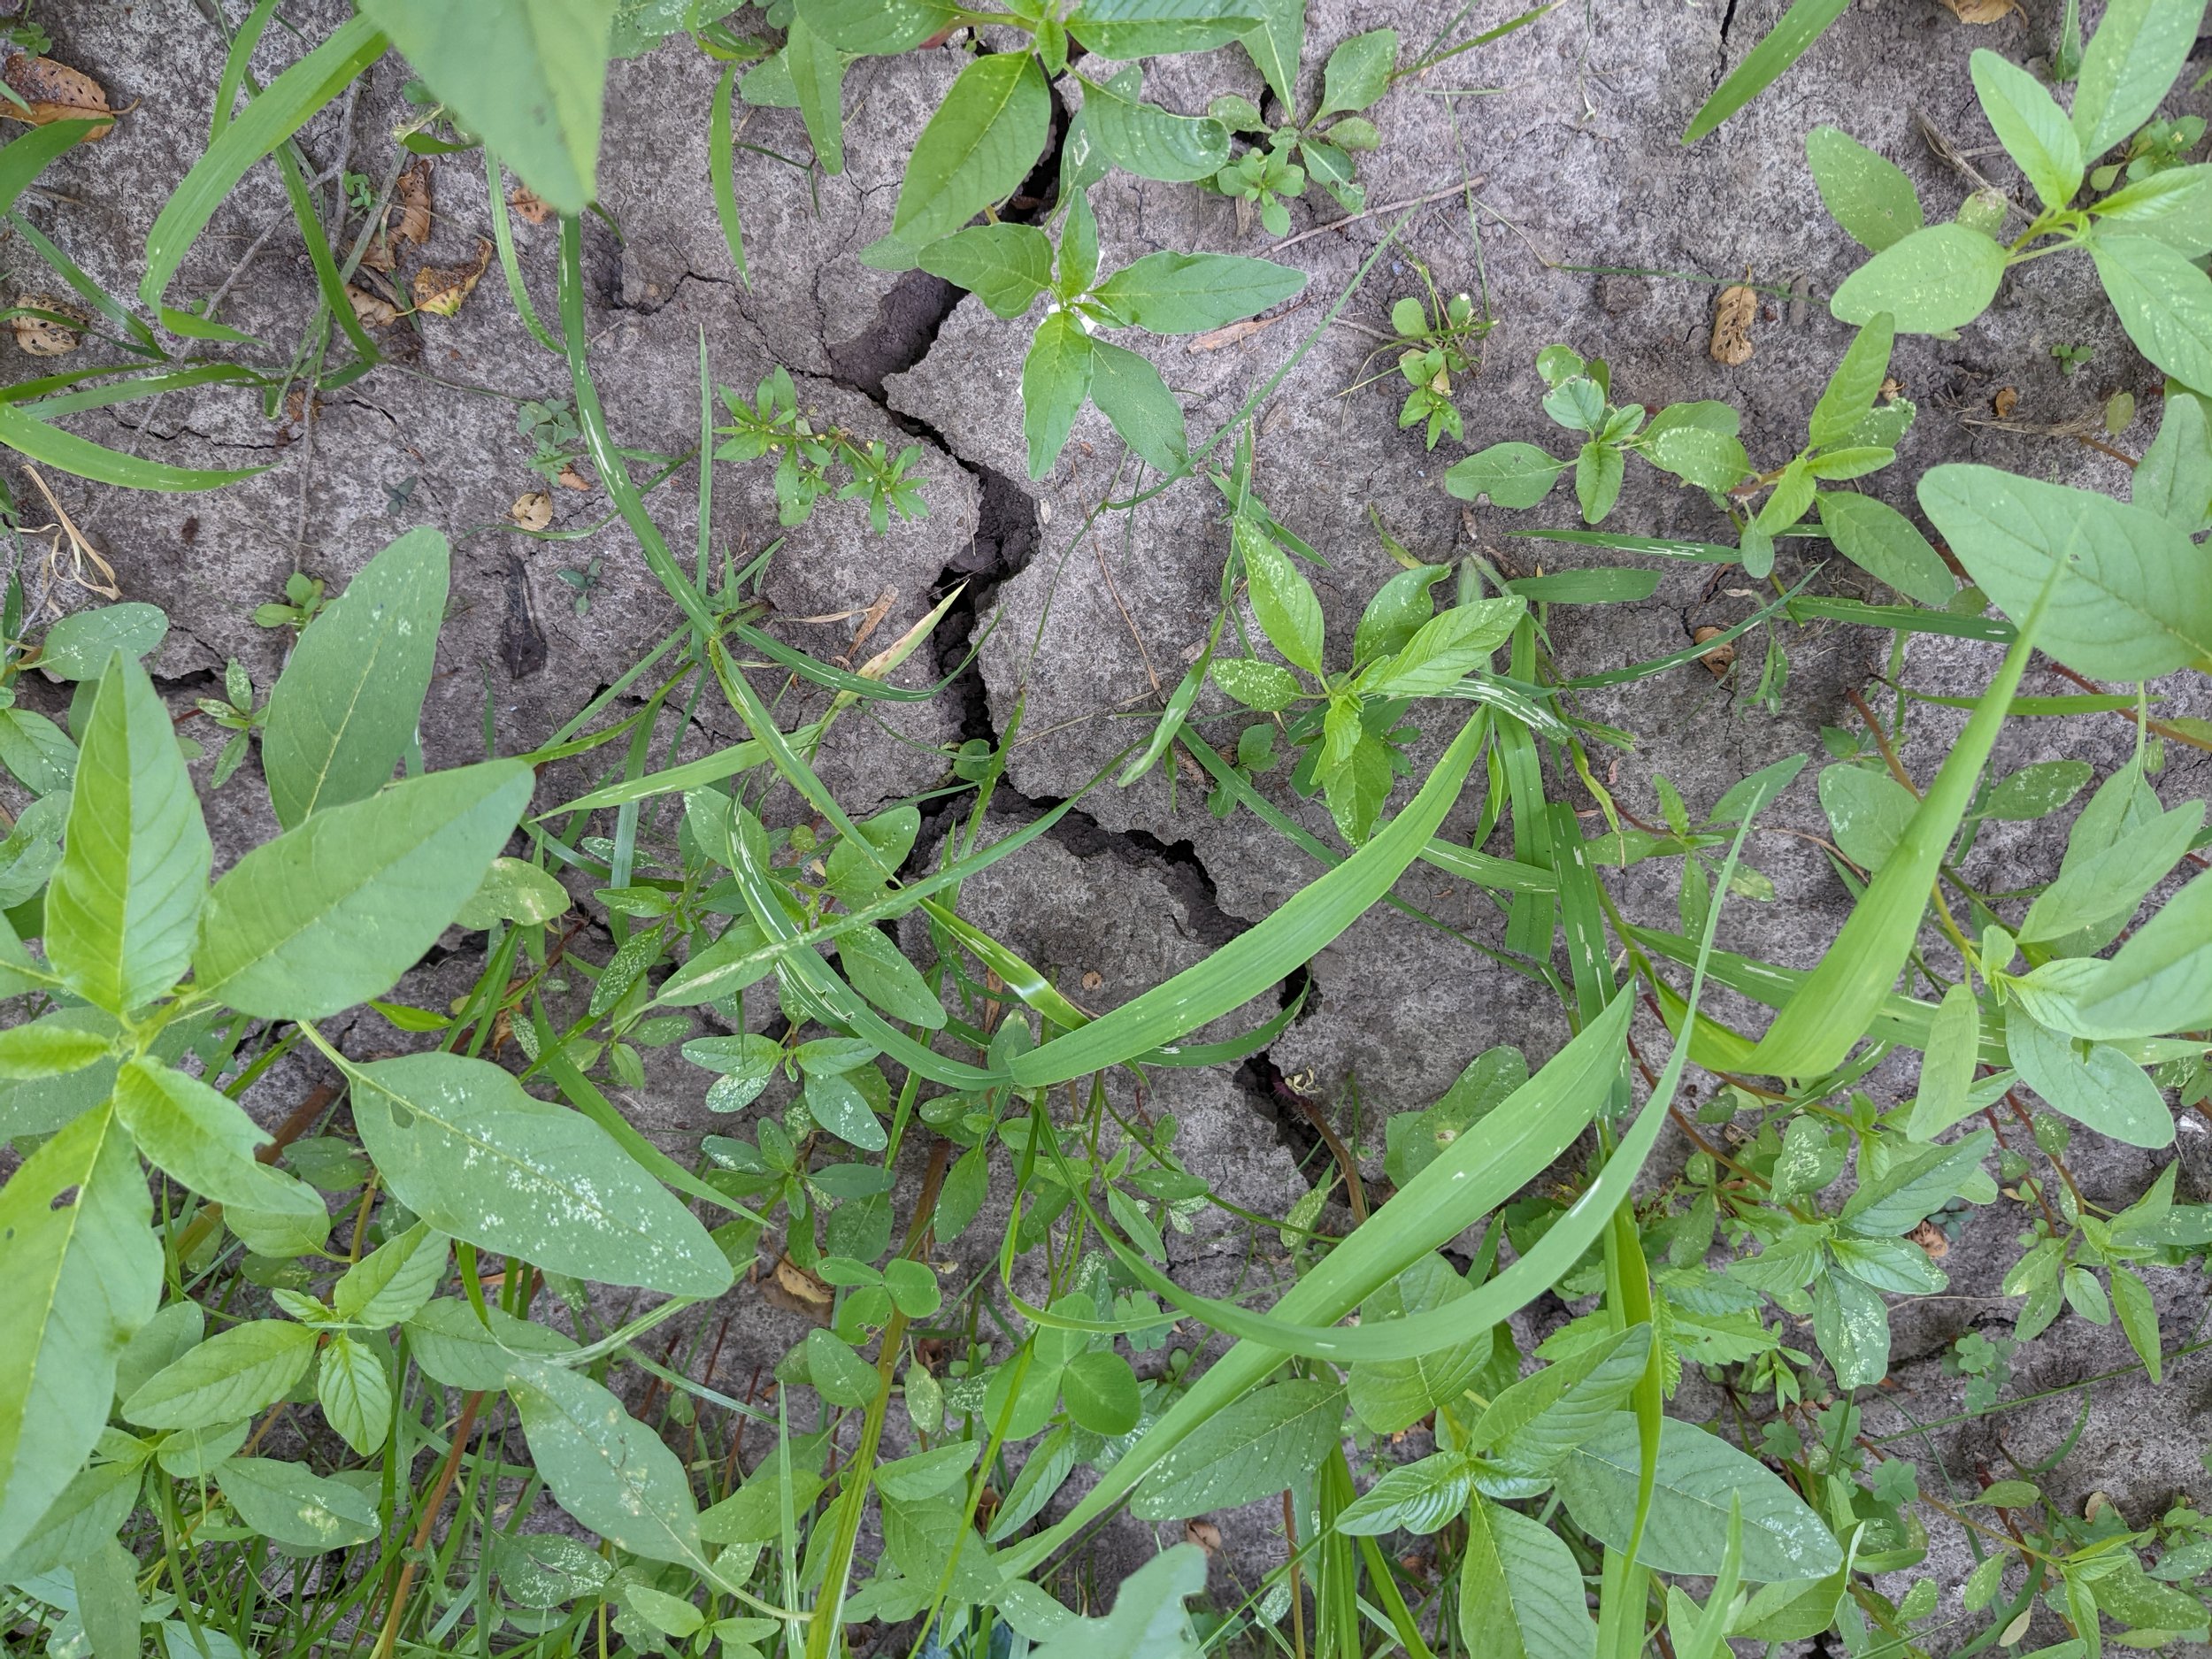 Large cracks in the yard indicate the soil is too dry.